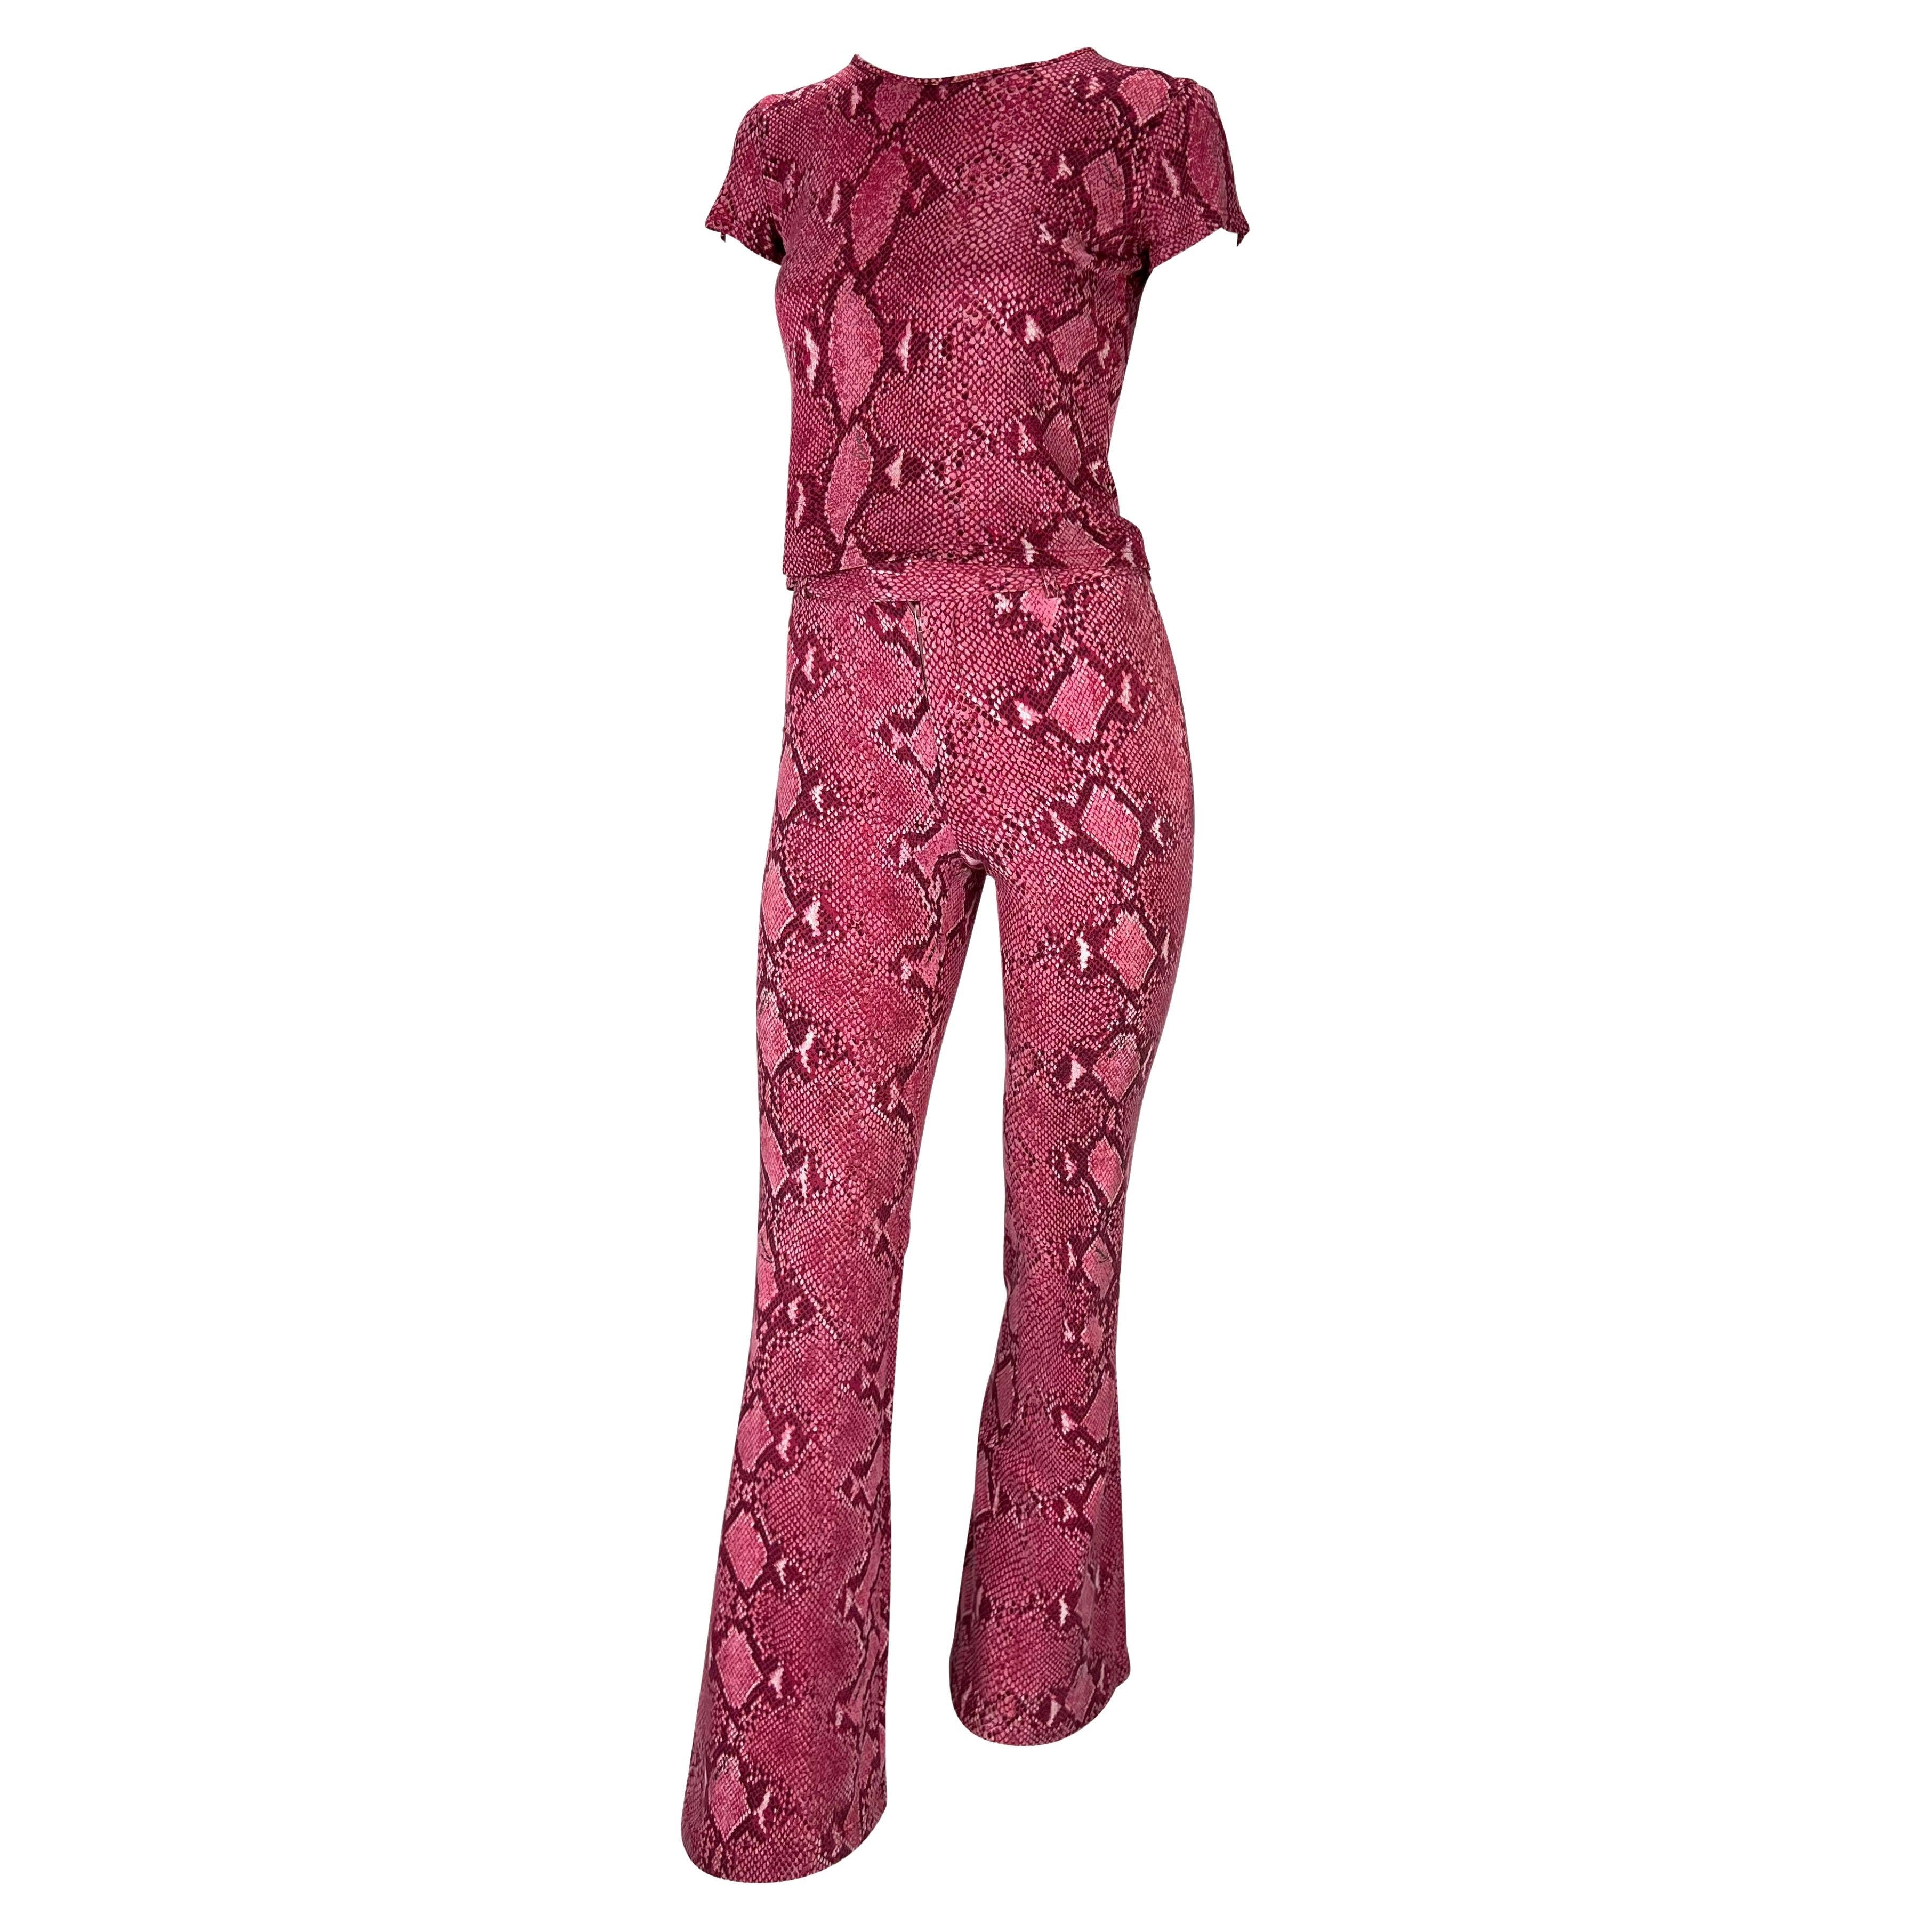 TheRealList presents: a fabulous pink snake print Gucci pant set, designed by Tom Ford. From the Spring/Summer 2000 collection, the season's runway was covered in the identical snakeskin print as this set. This set consists of fitted flare pants and